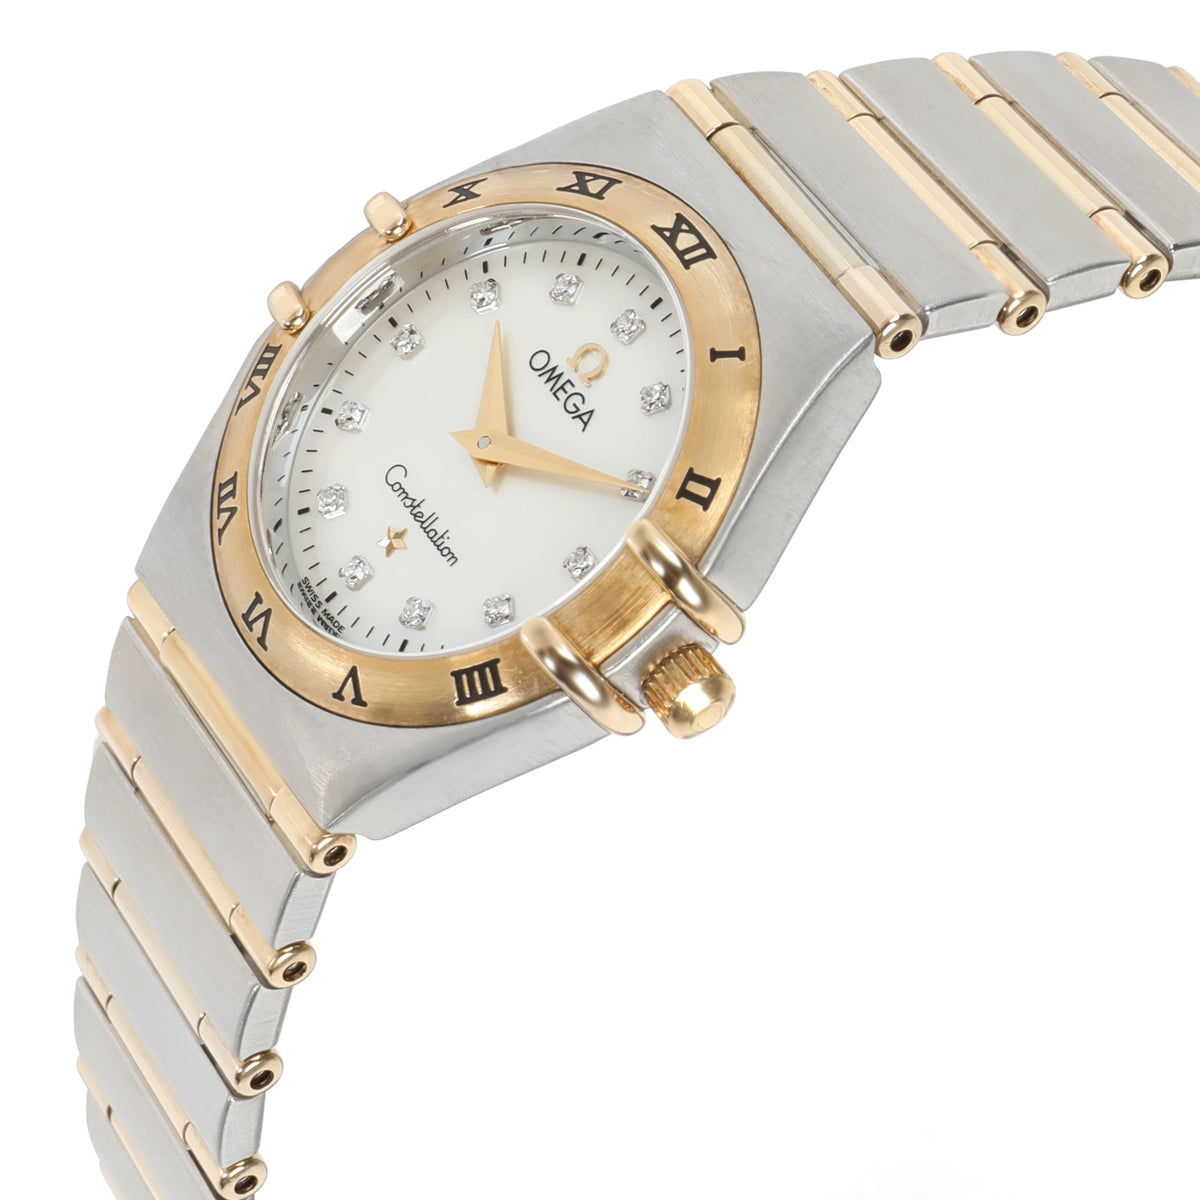 Omega Constellation 1272.75.00 Women's Watch in 18kt Stainless Steel/Yellow Gold